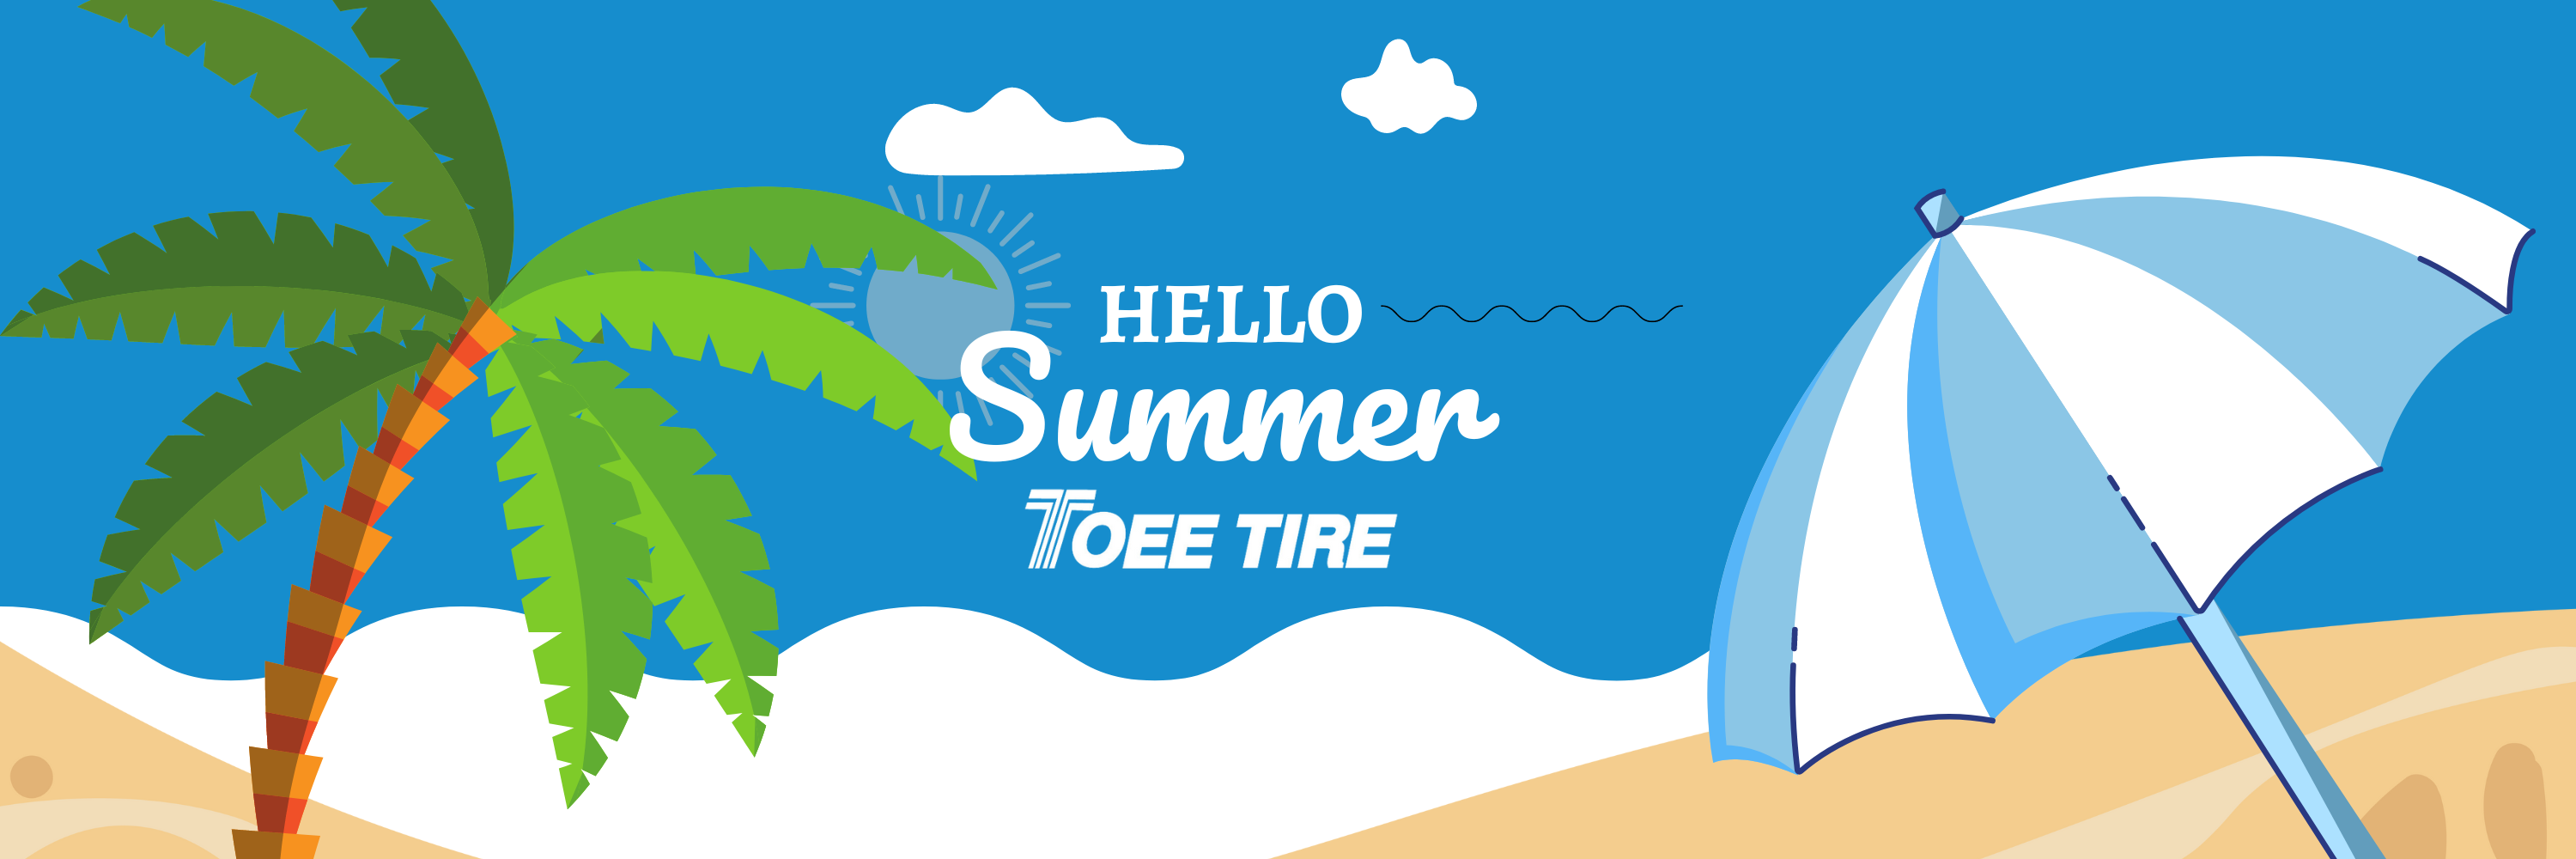 Hello summer poster 1500 x 500 px